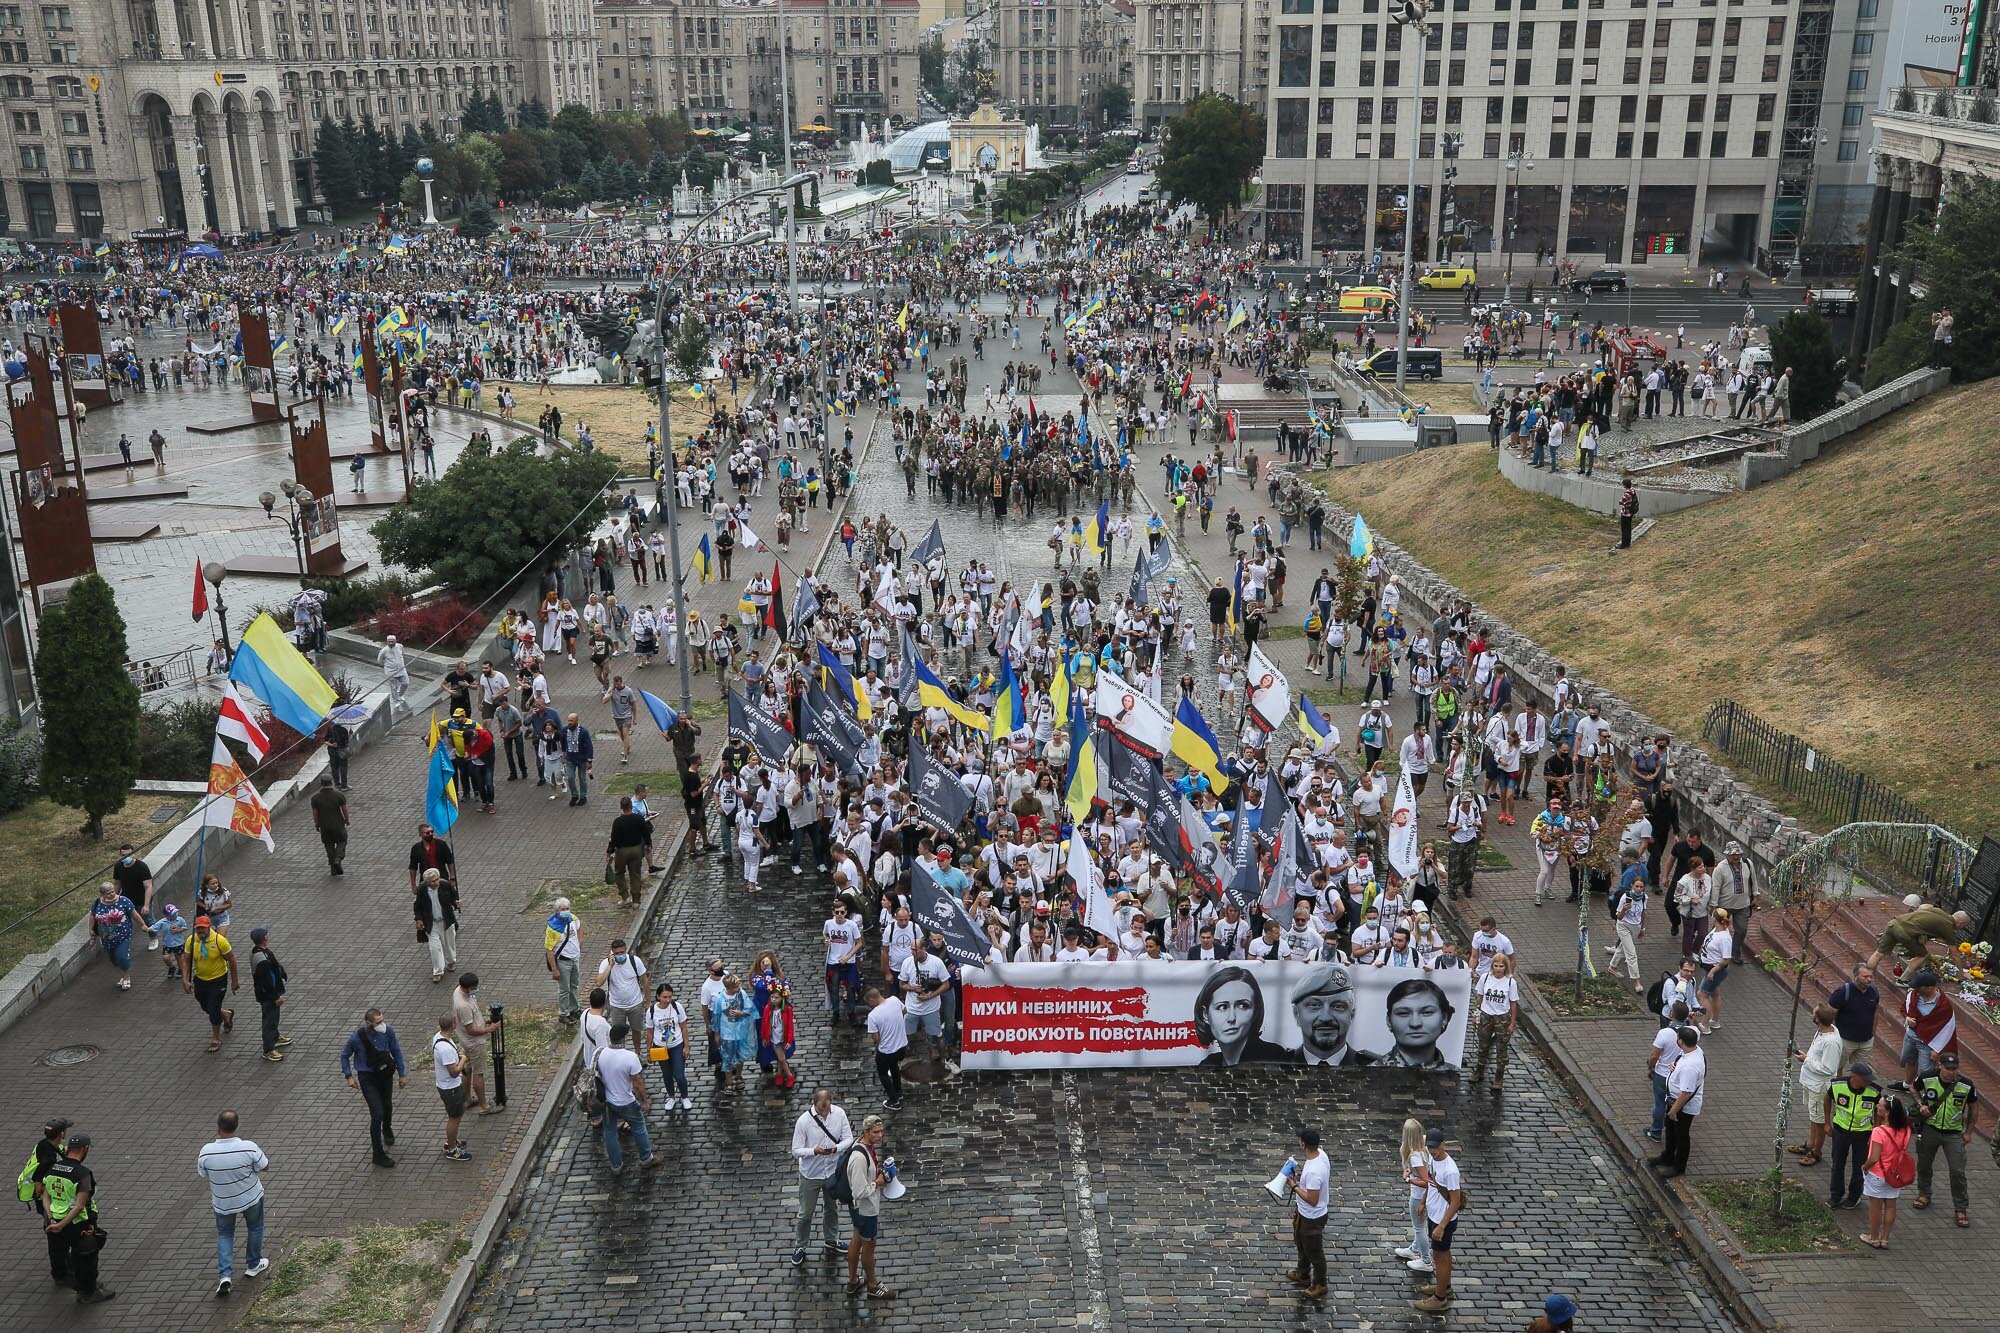 Ukrainian veterans and activists participate in the March of Defenders of Ukraine, an event that celebrated Ukraine&#8217;s Independence Day in Kyiv on Aug. 24, 2020.